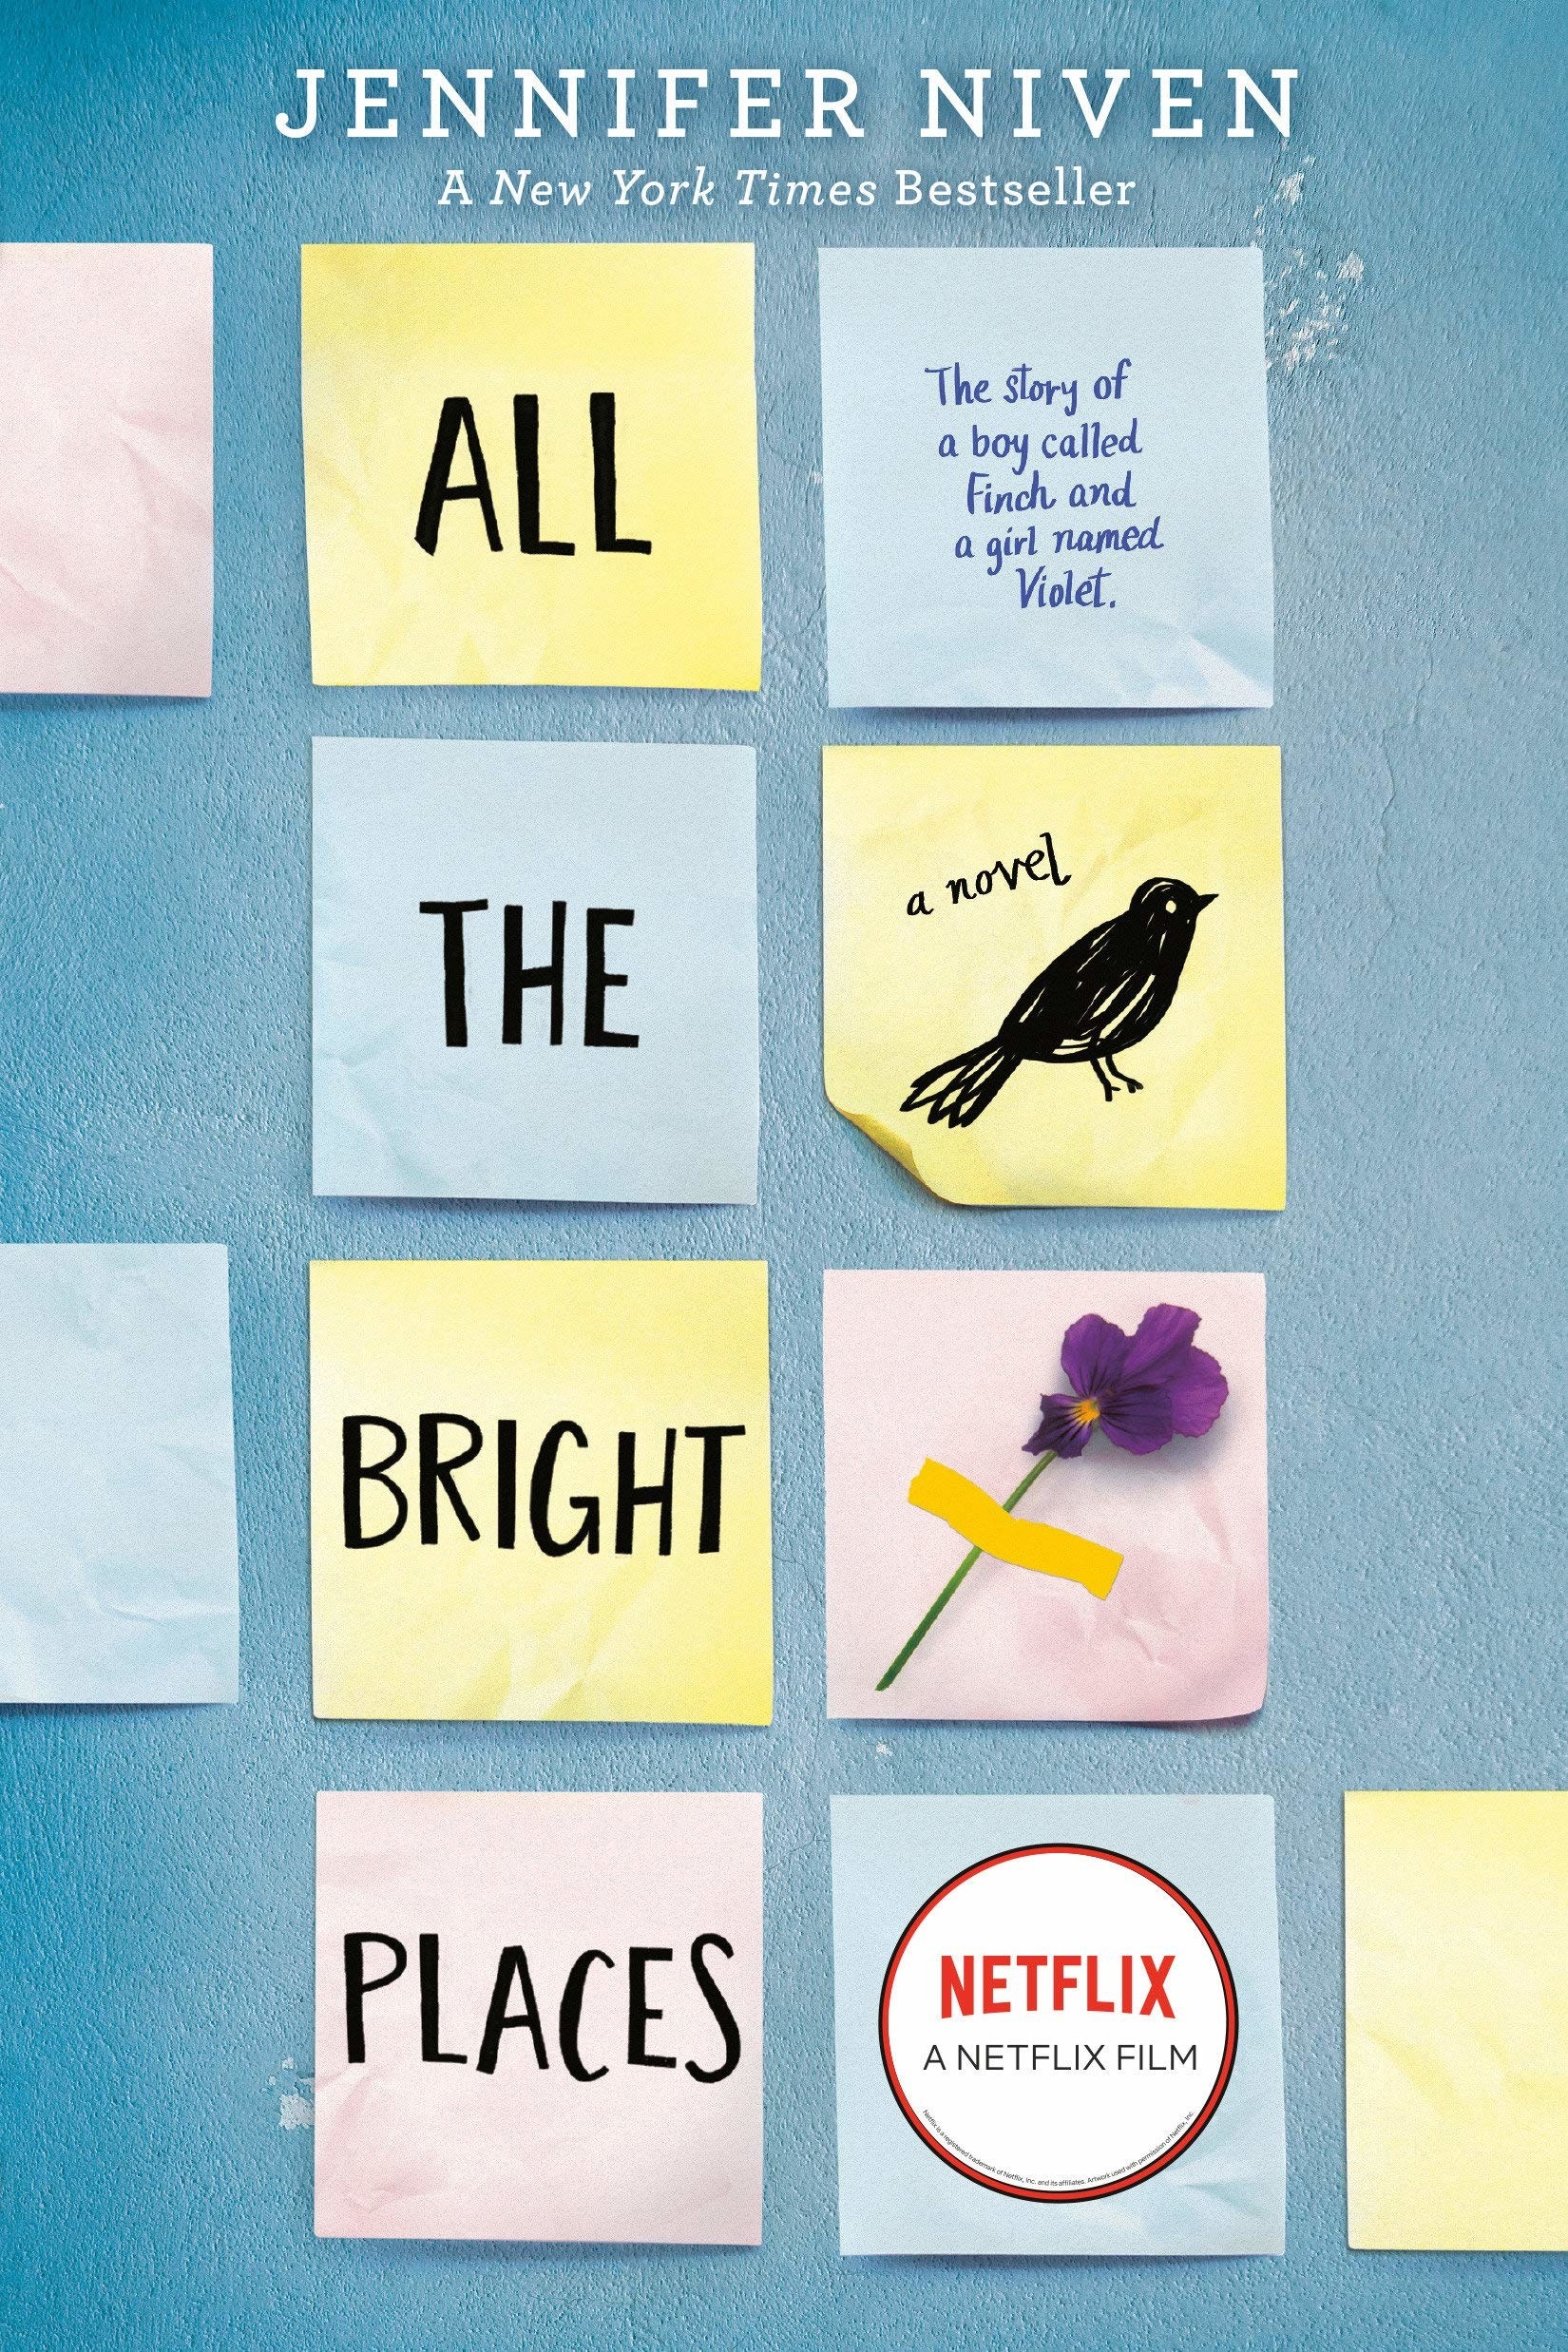 Book cover of &quot;All the bright places&quot;